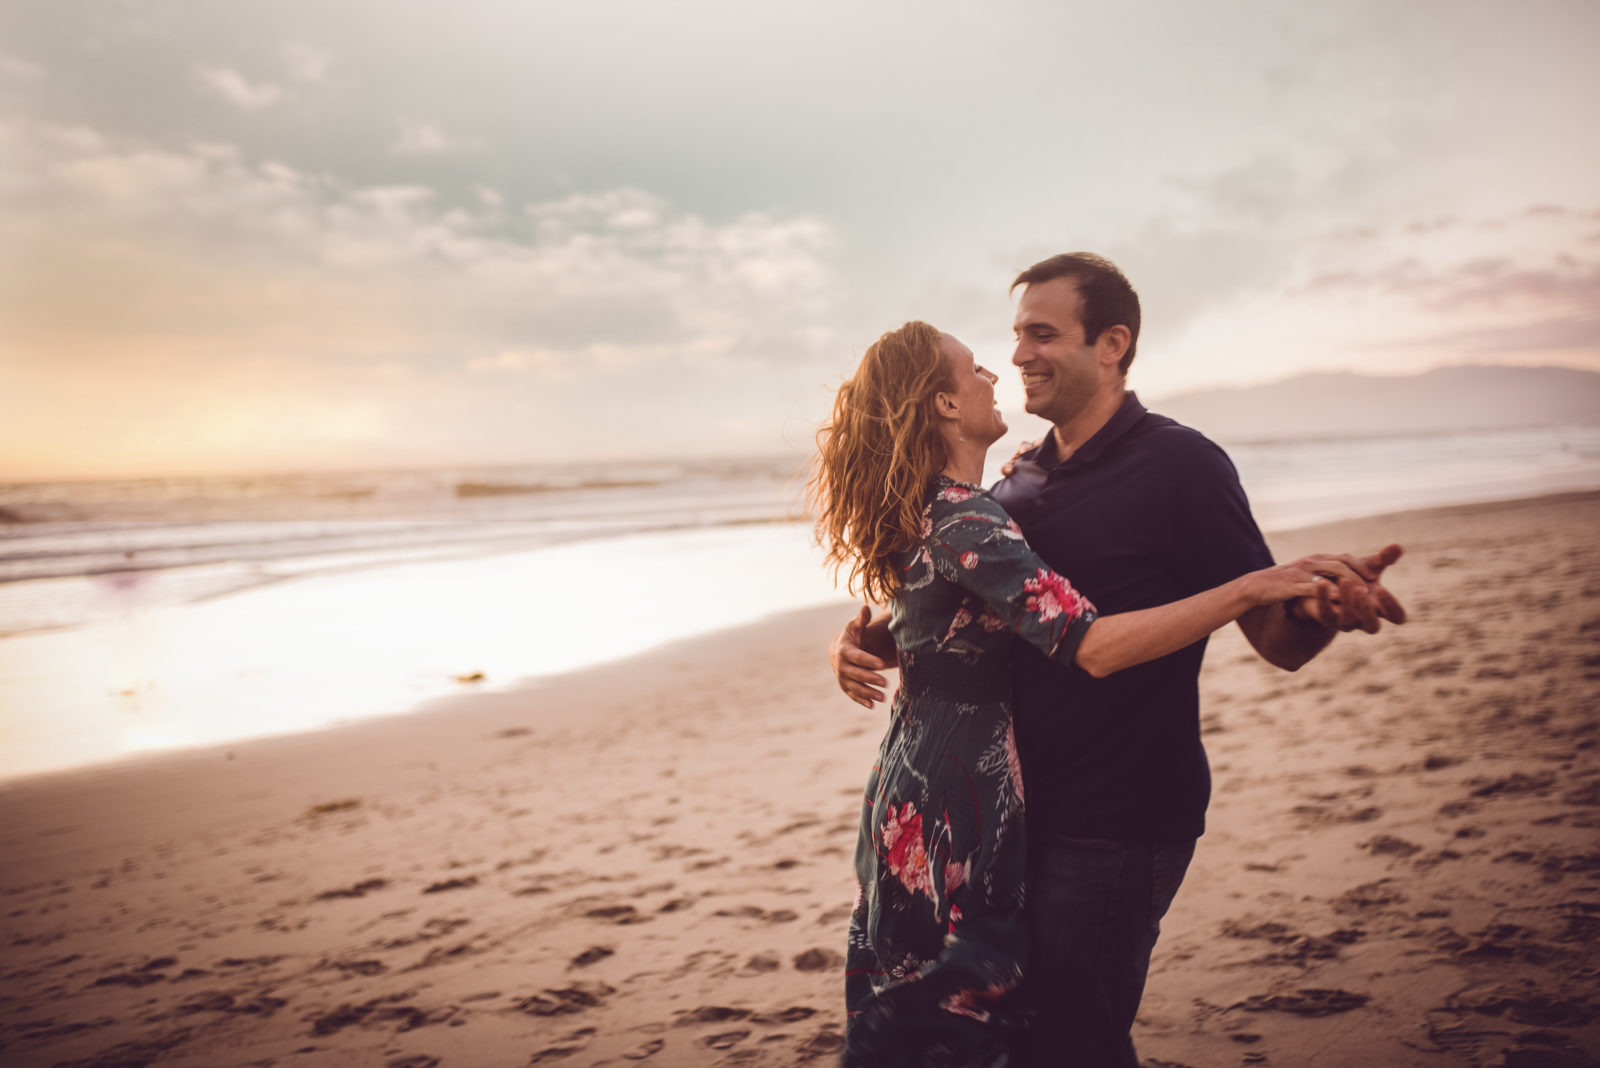 Color image of couple dancing at the beach as photographed by Black and white image of Grandparents with all the grandchildren photographed by Los Angeles Family photographer and videographer Diana Hinek for Dear Birth